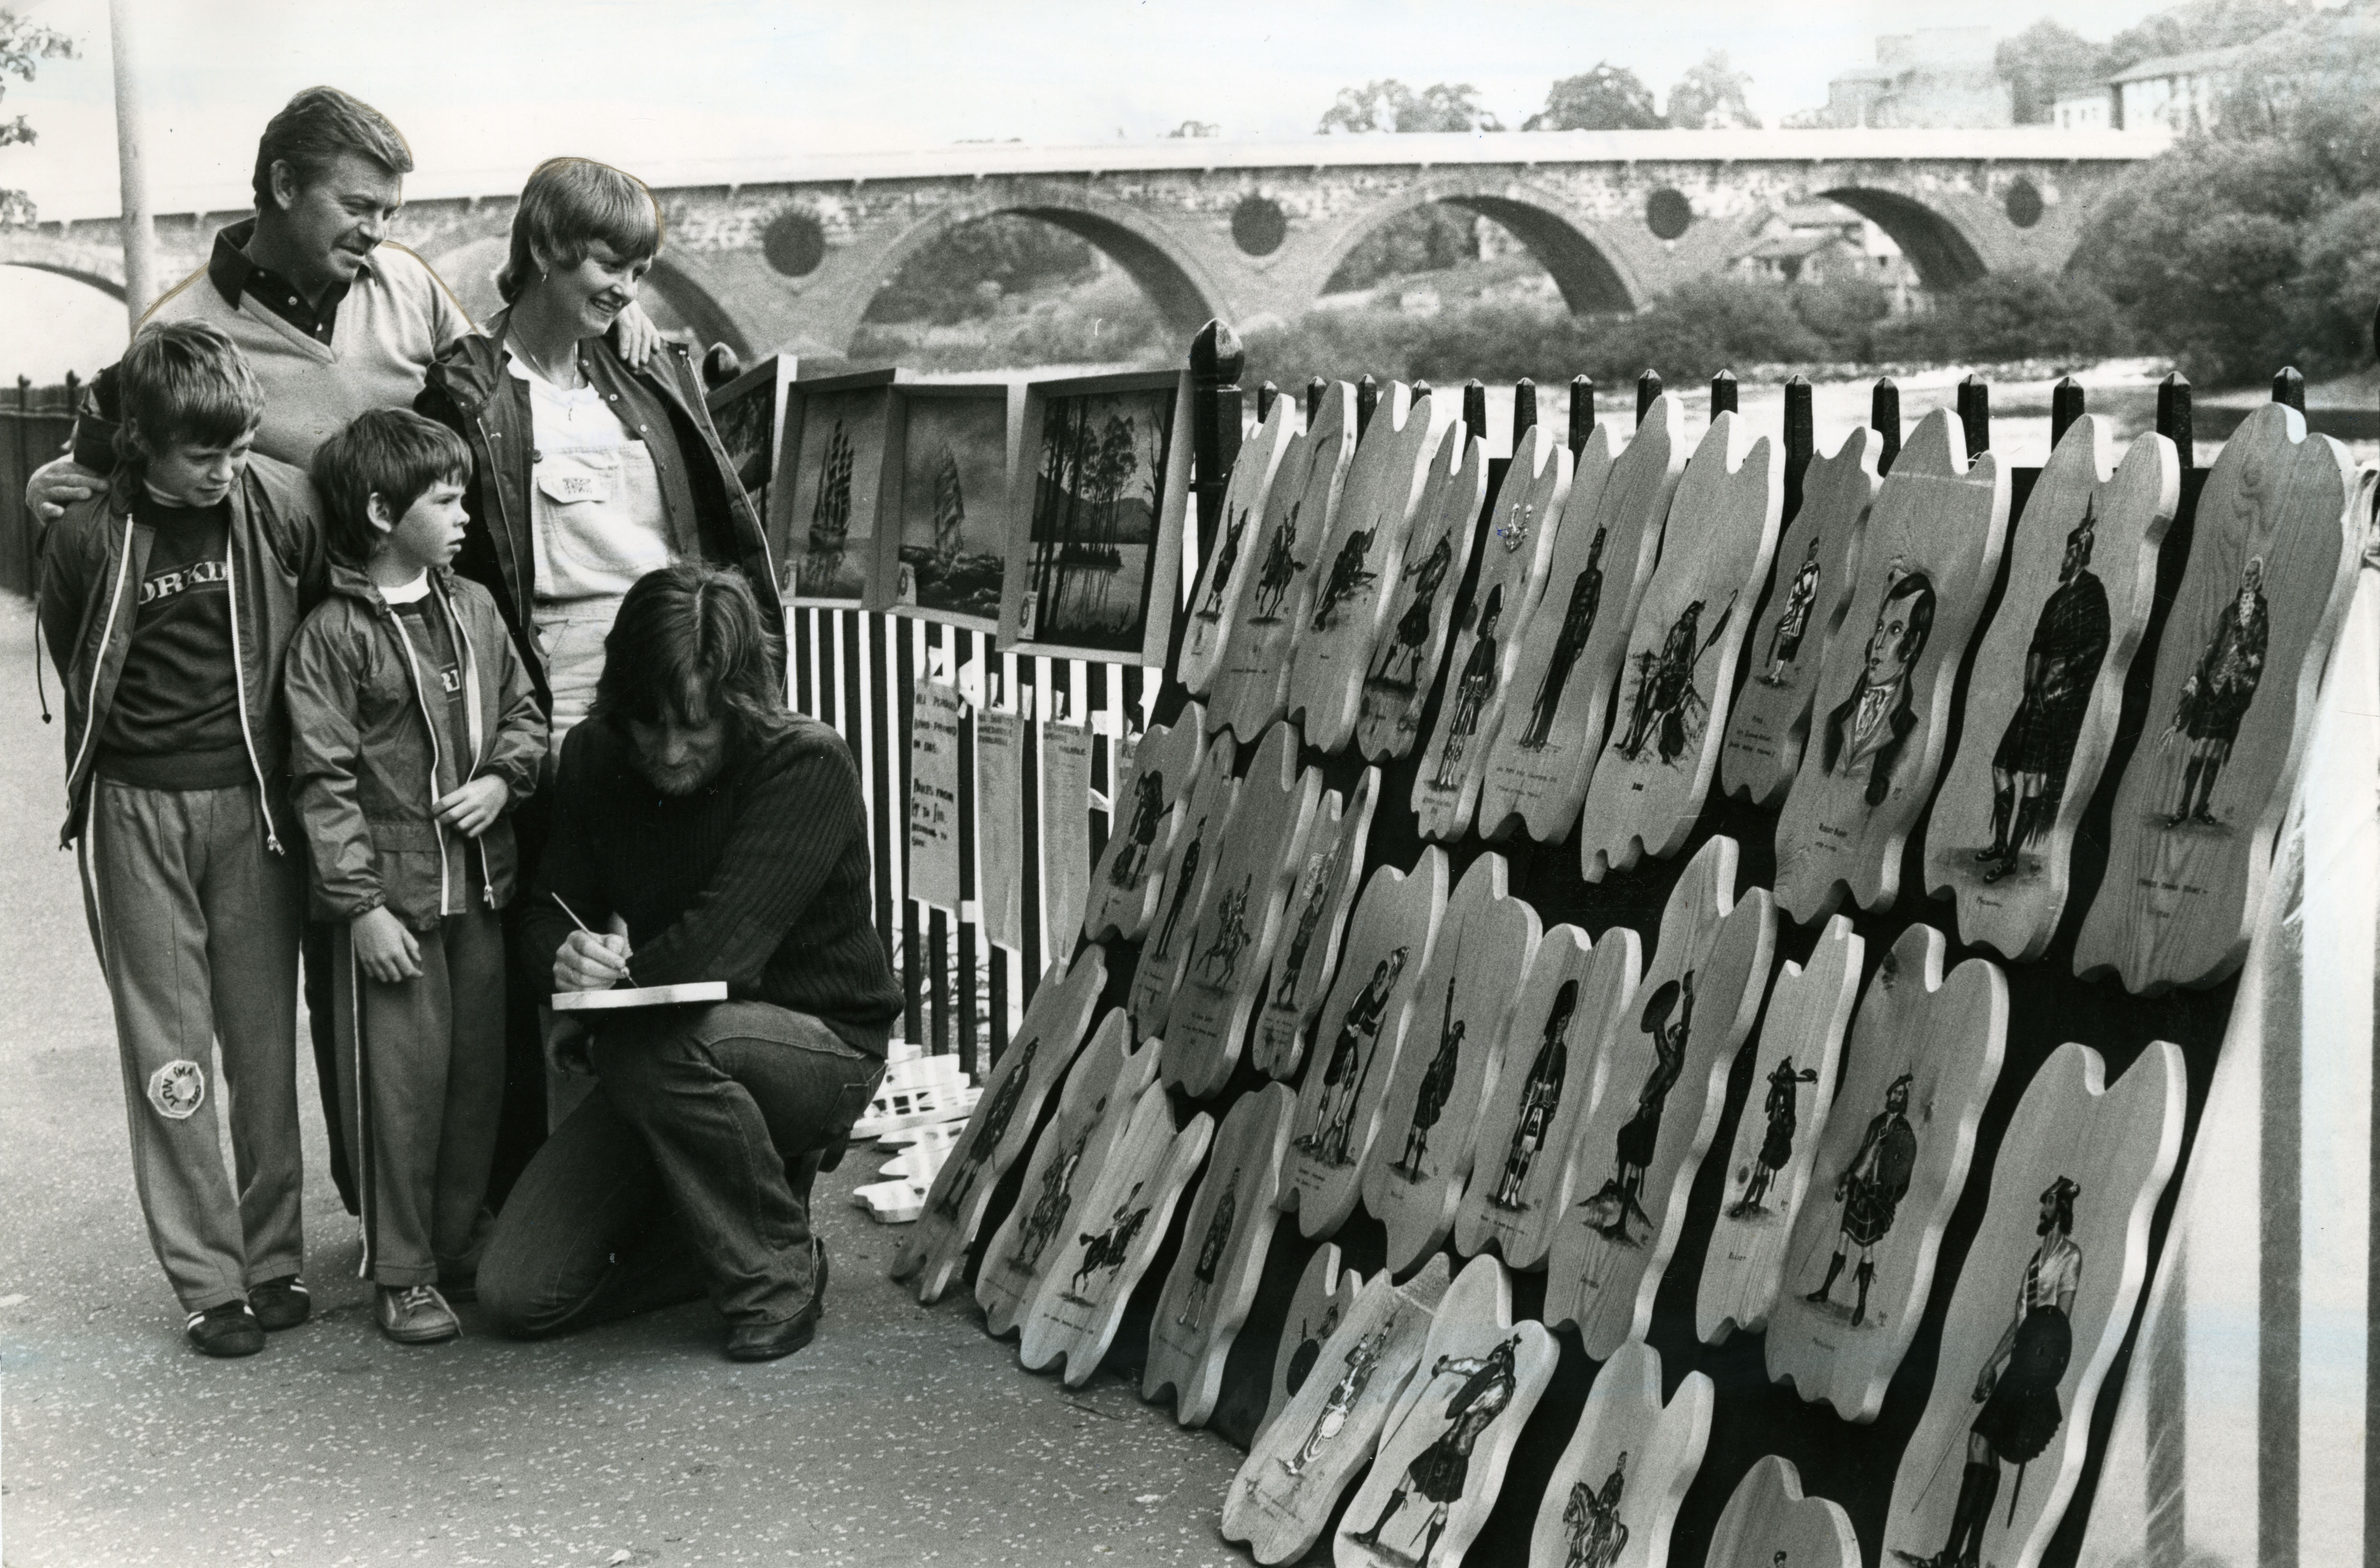 An artist at the festival in 1980